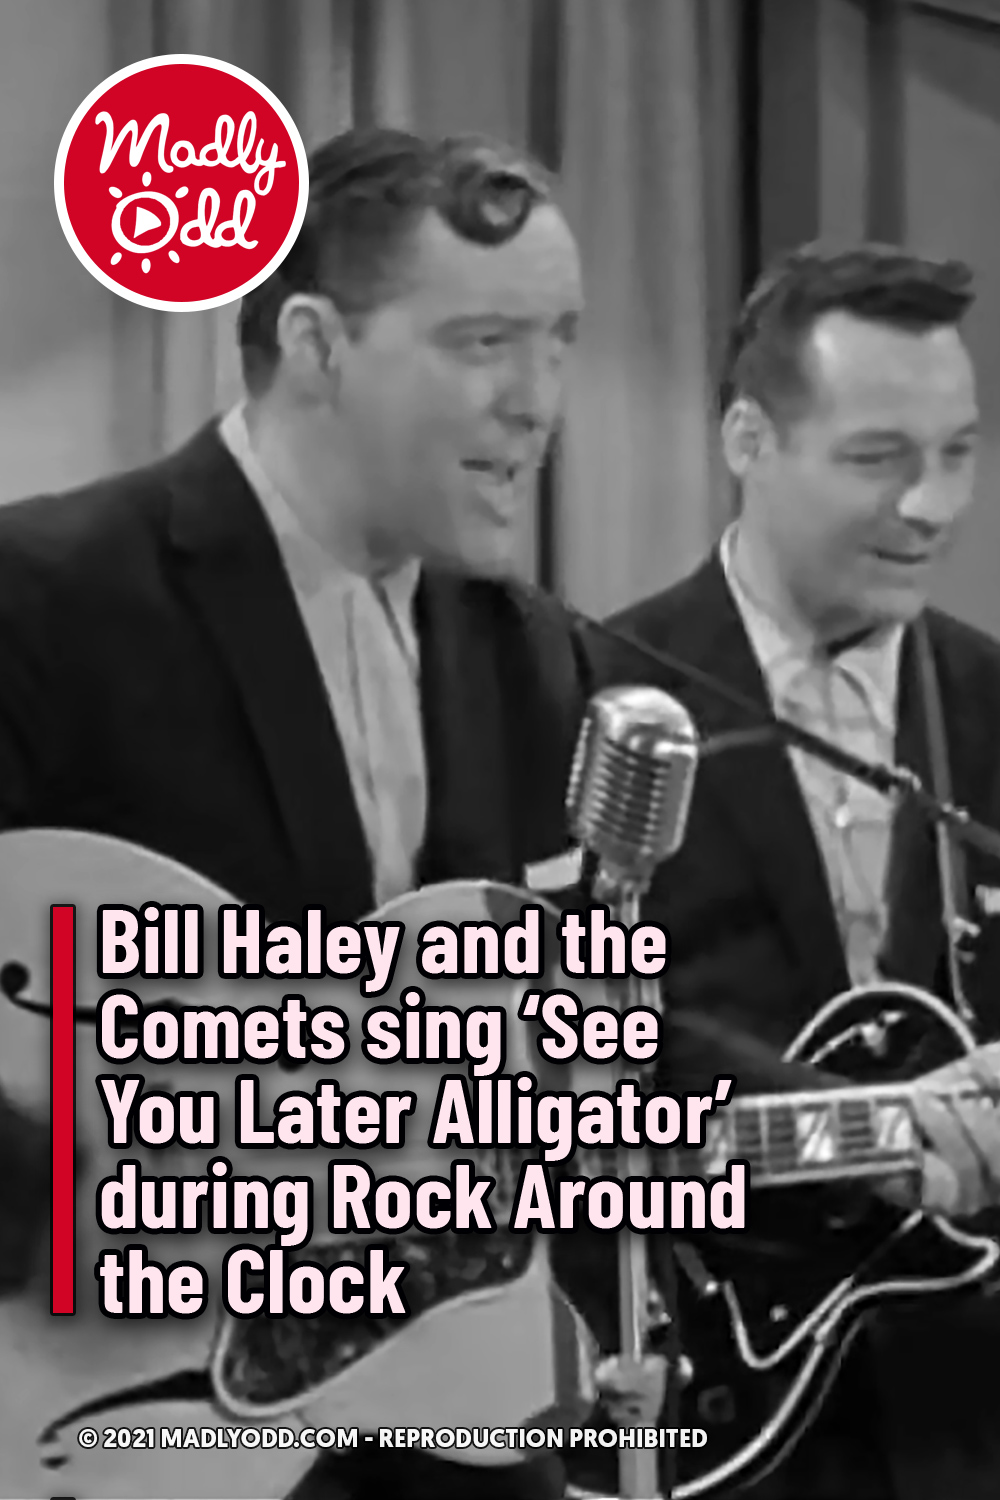 Bill Haley and the Comets sing ‘See You Later Alligator’ during Rock Around the Clock